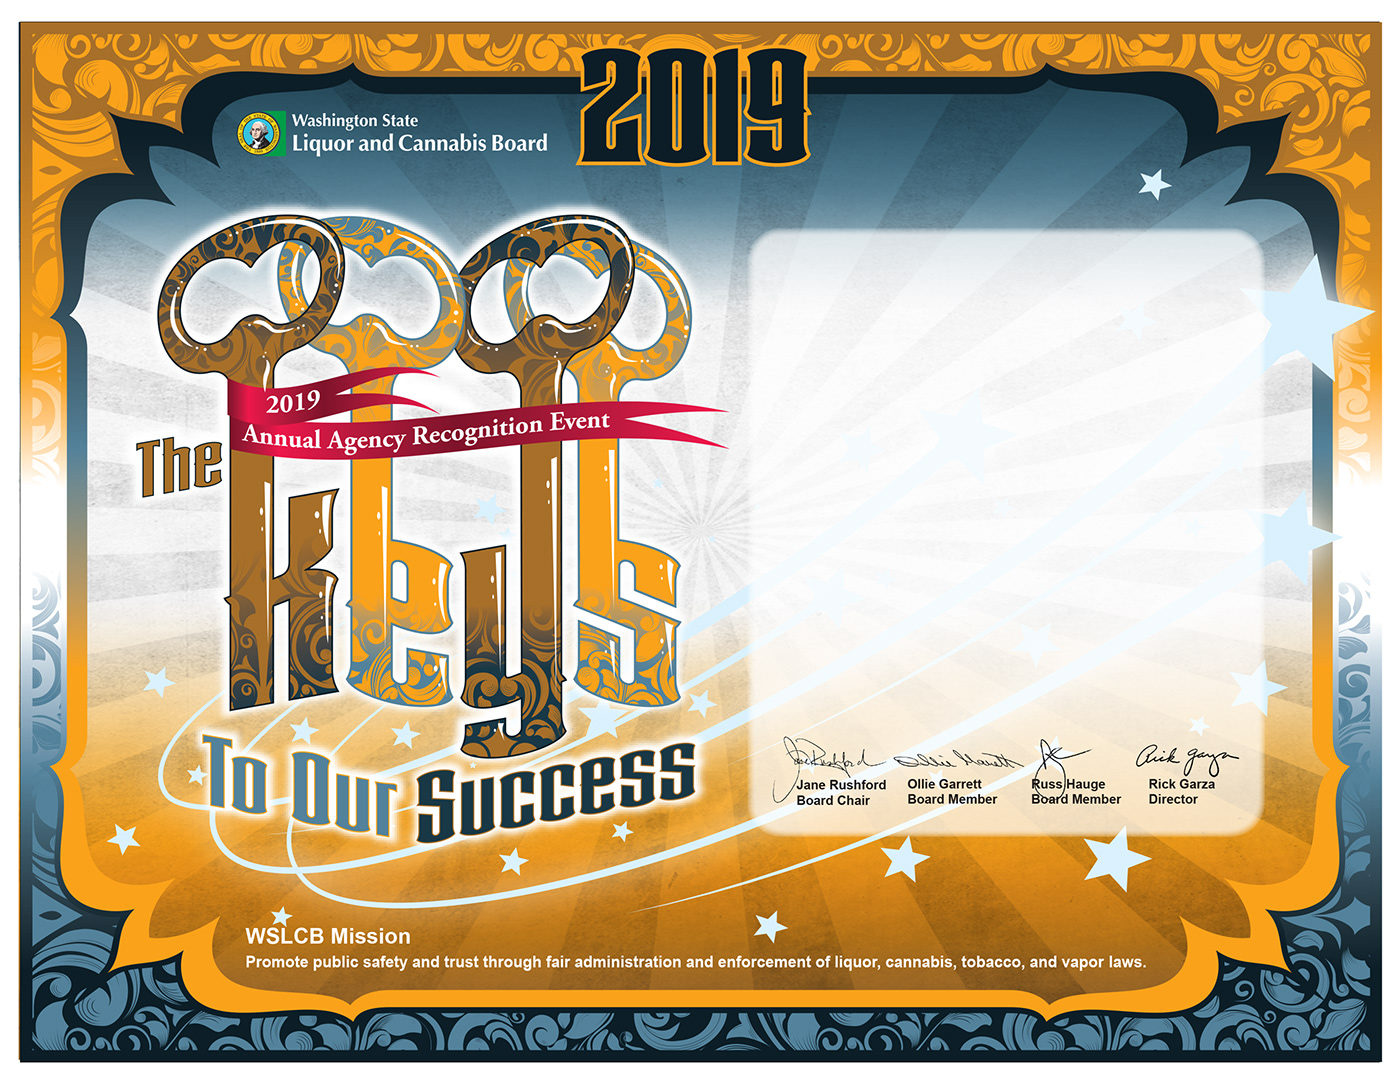 agency collage Event poster recognition success Illustrator photoshop